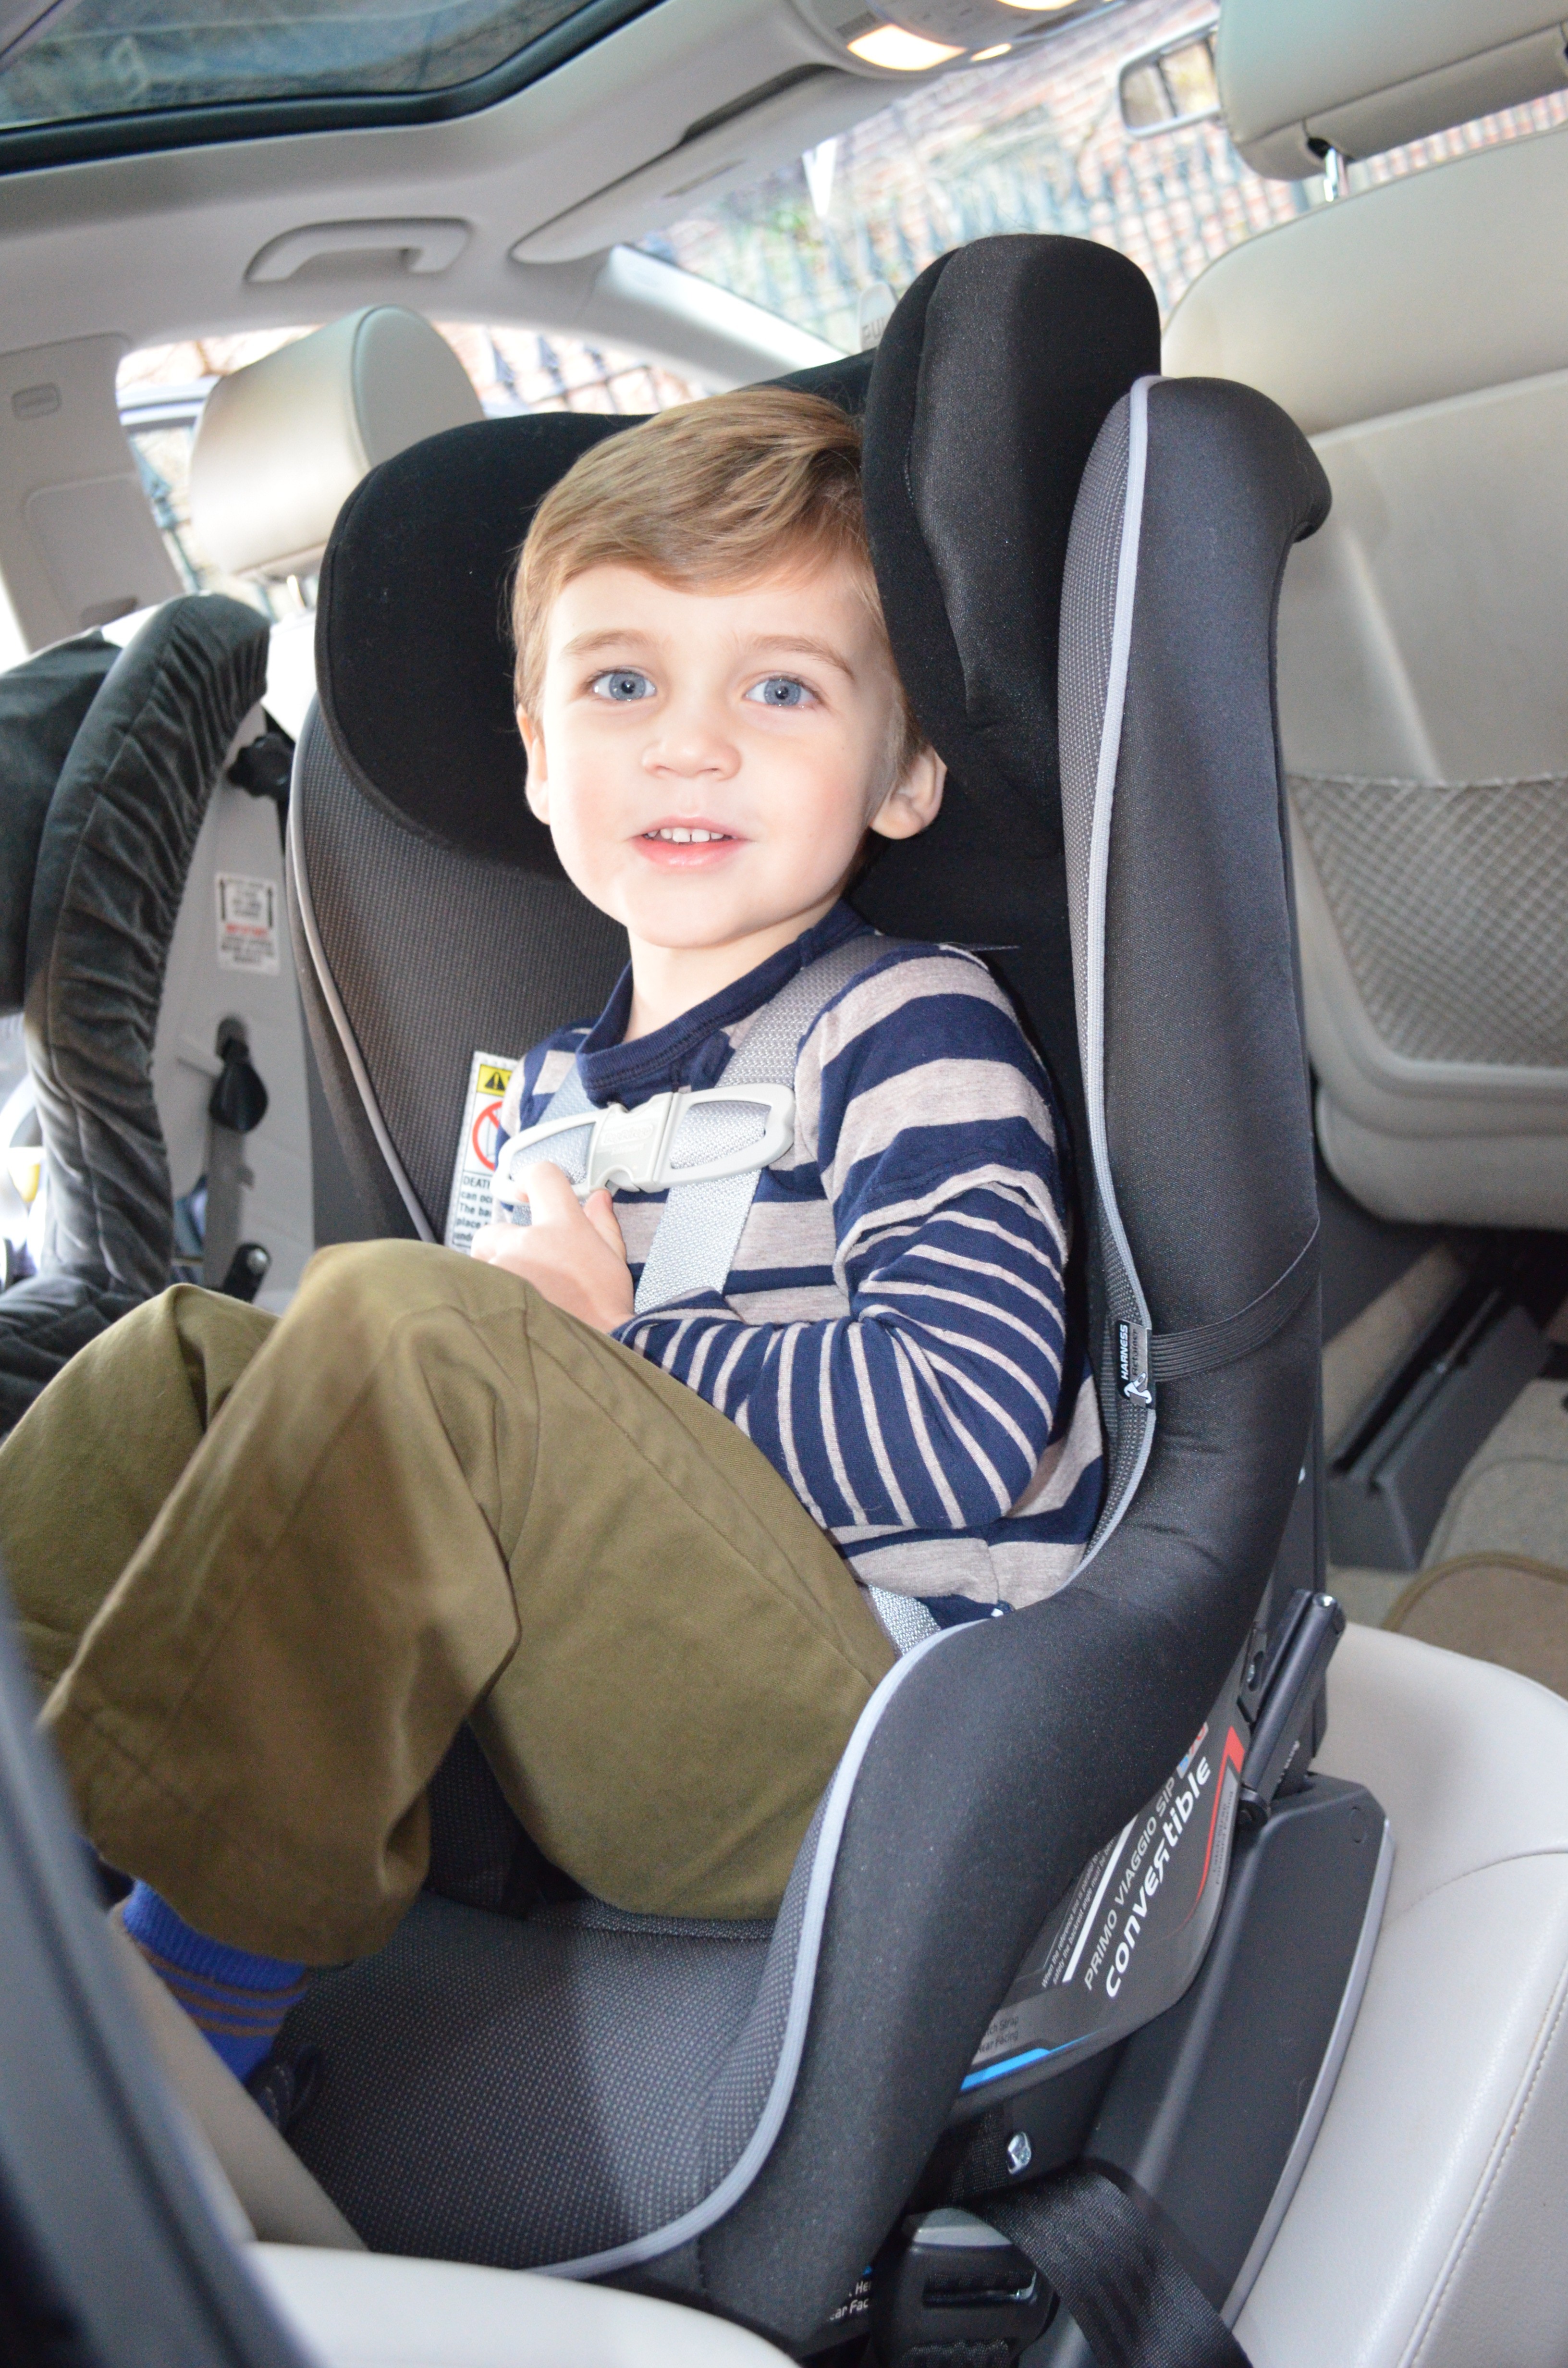 Your Child Turn Forward Facing, When Can You Change Baby Seat To Forward Facing